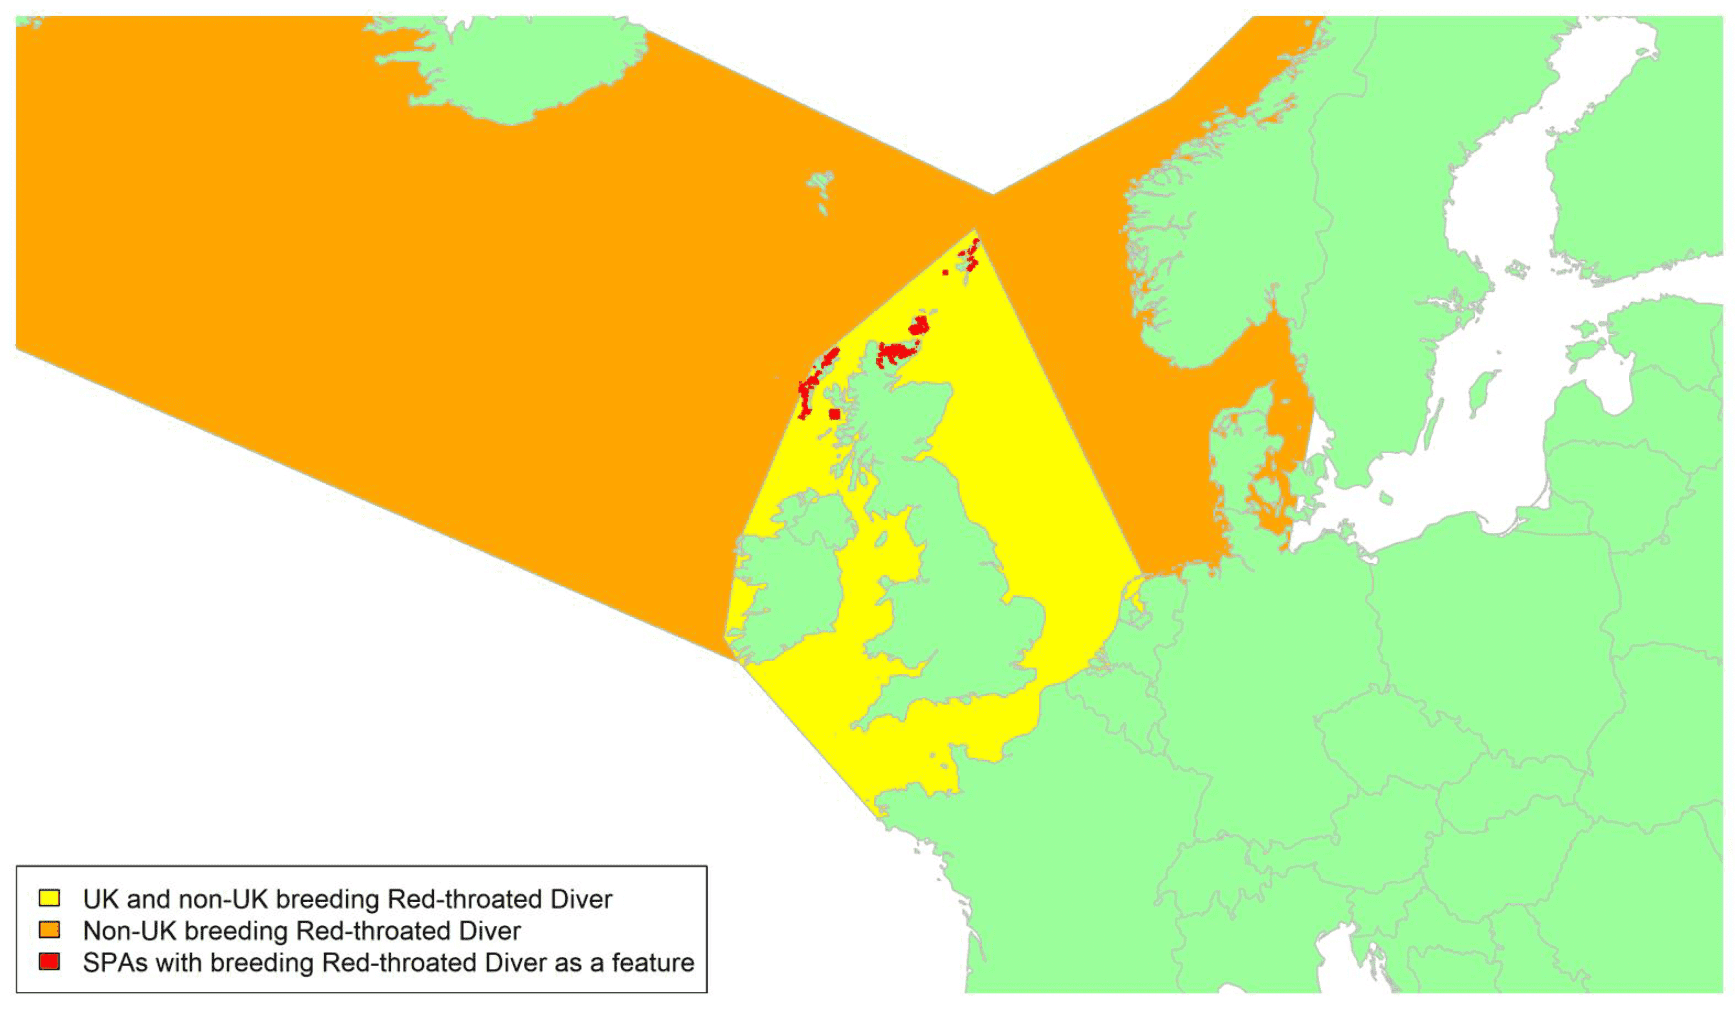 Map of North West Europe showing migratory routes and SPAs within the UK for breeding Red-throated Diver as described in the text below.